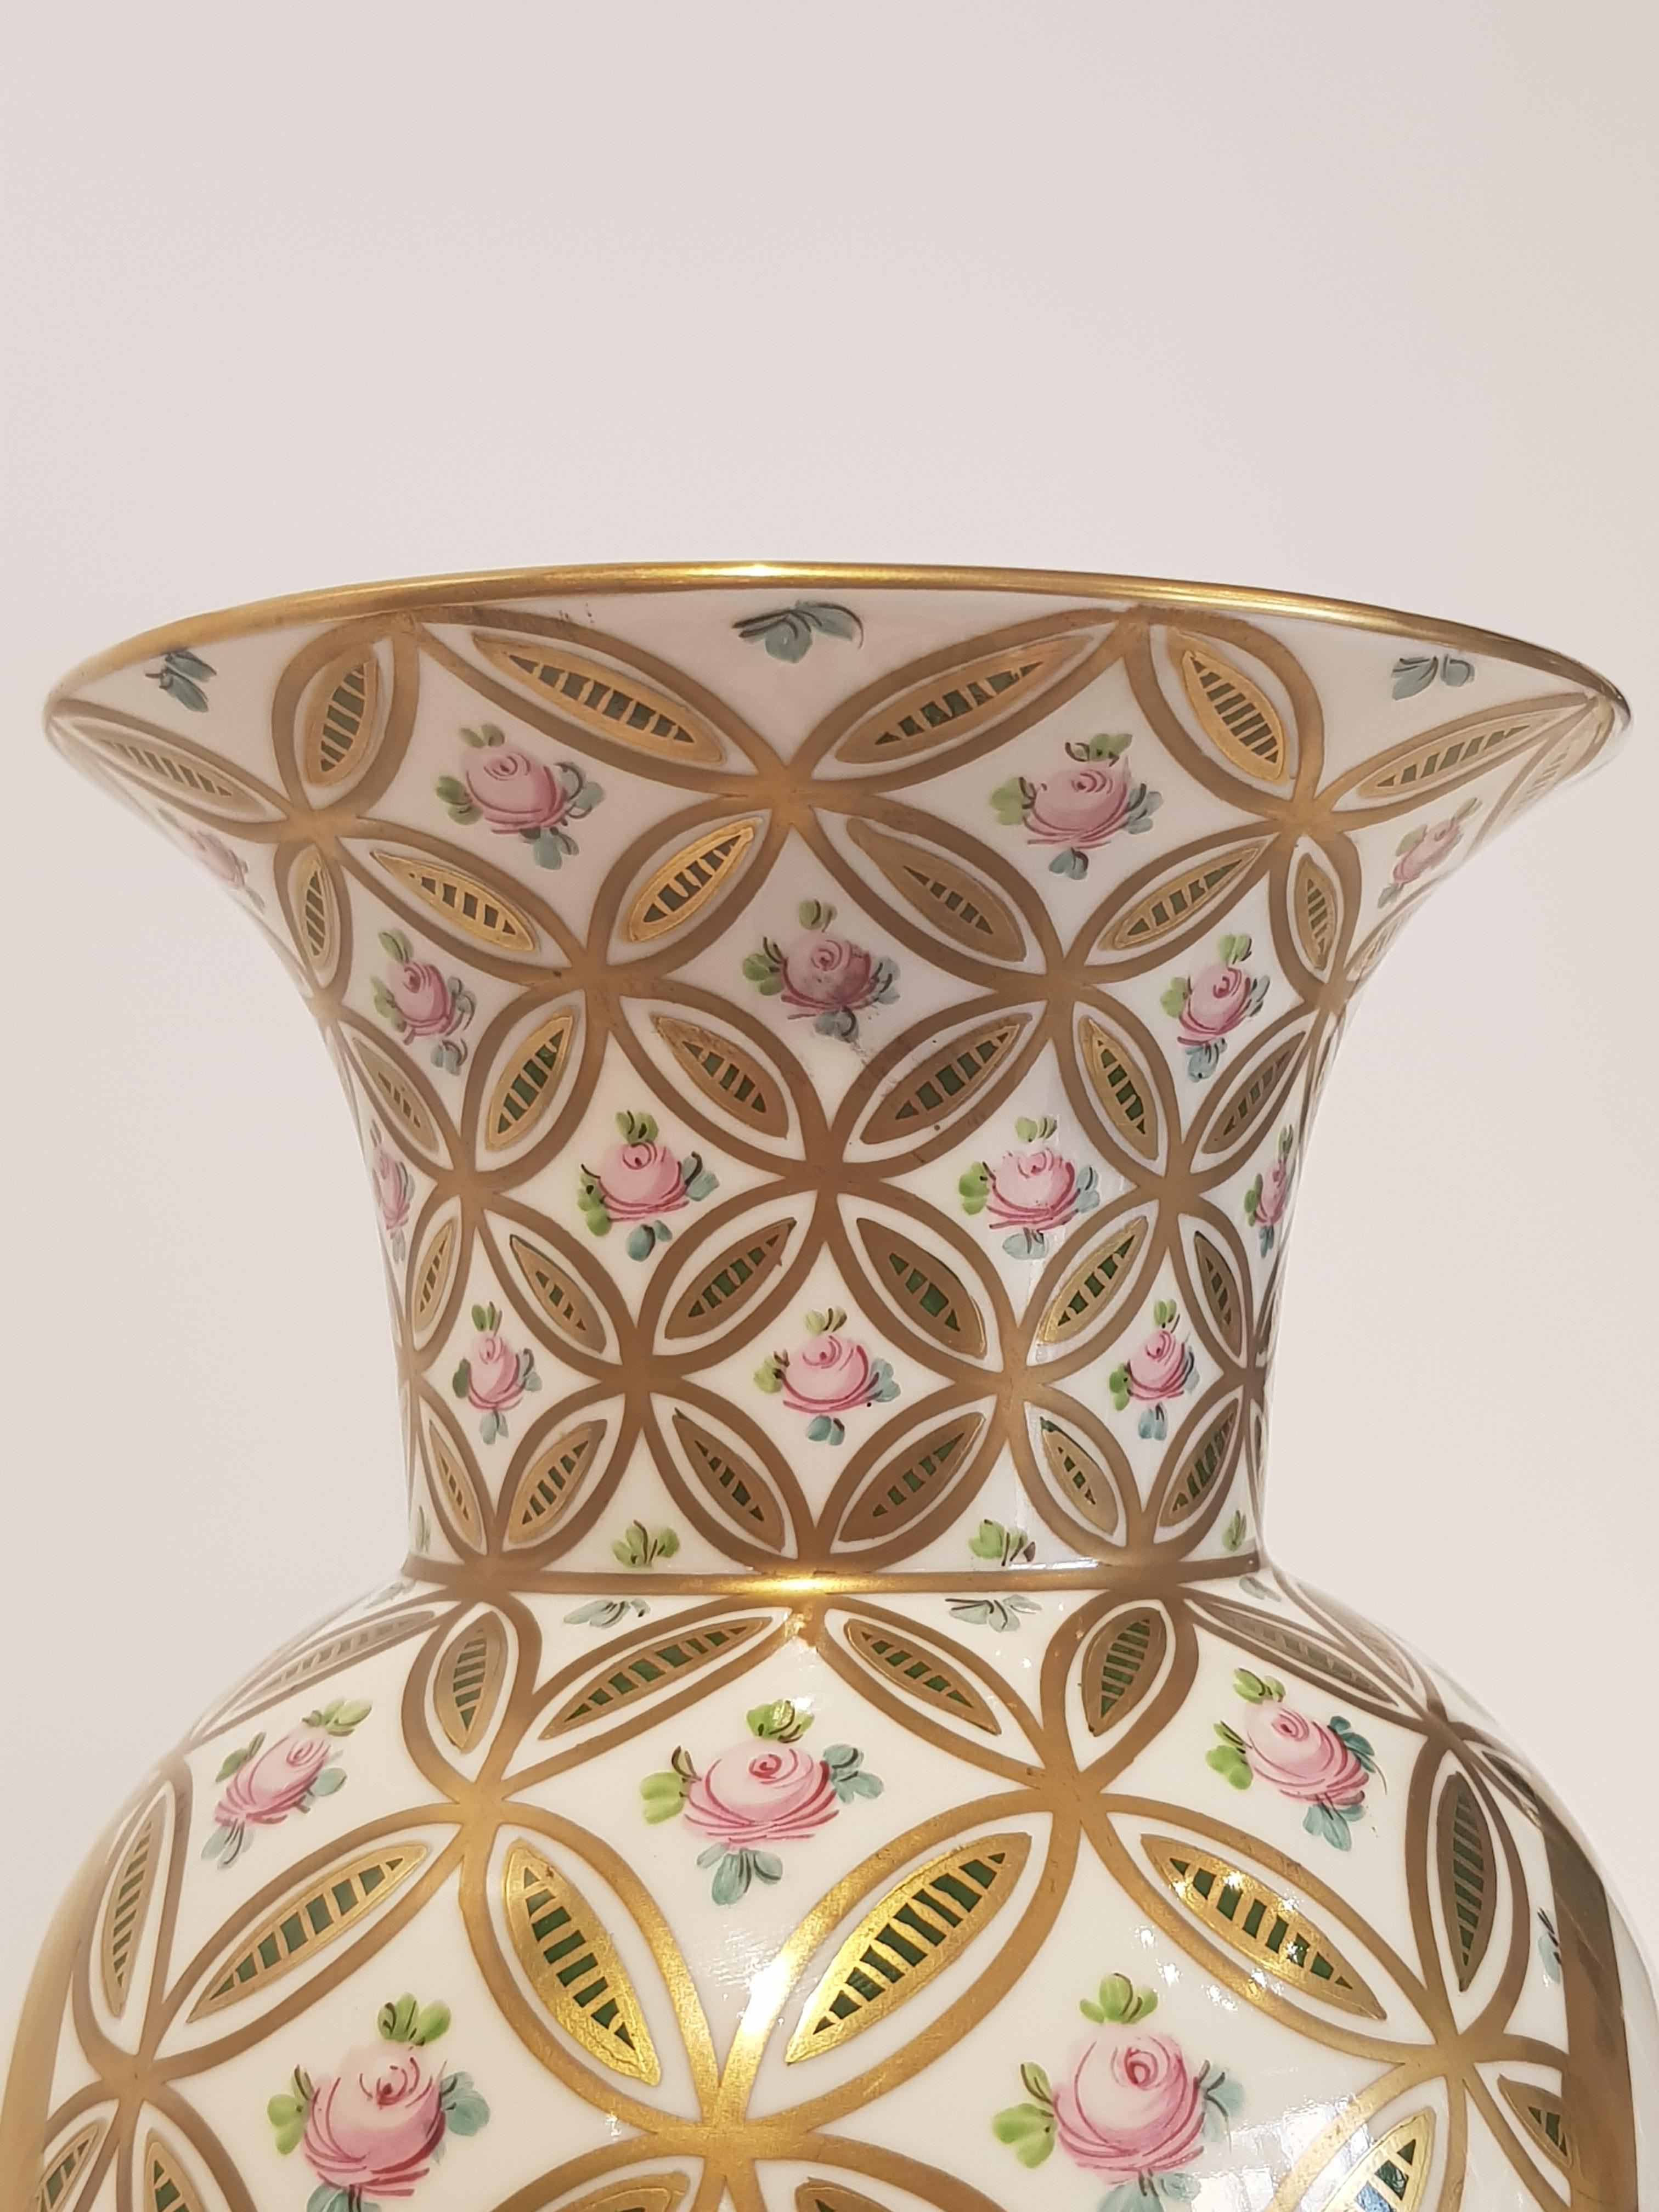 Mid-20th Century White and pure gold porcelain vases decorated with flowers 1970s Dresden  For Sale